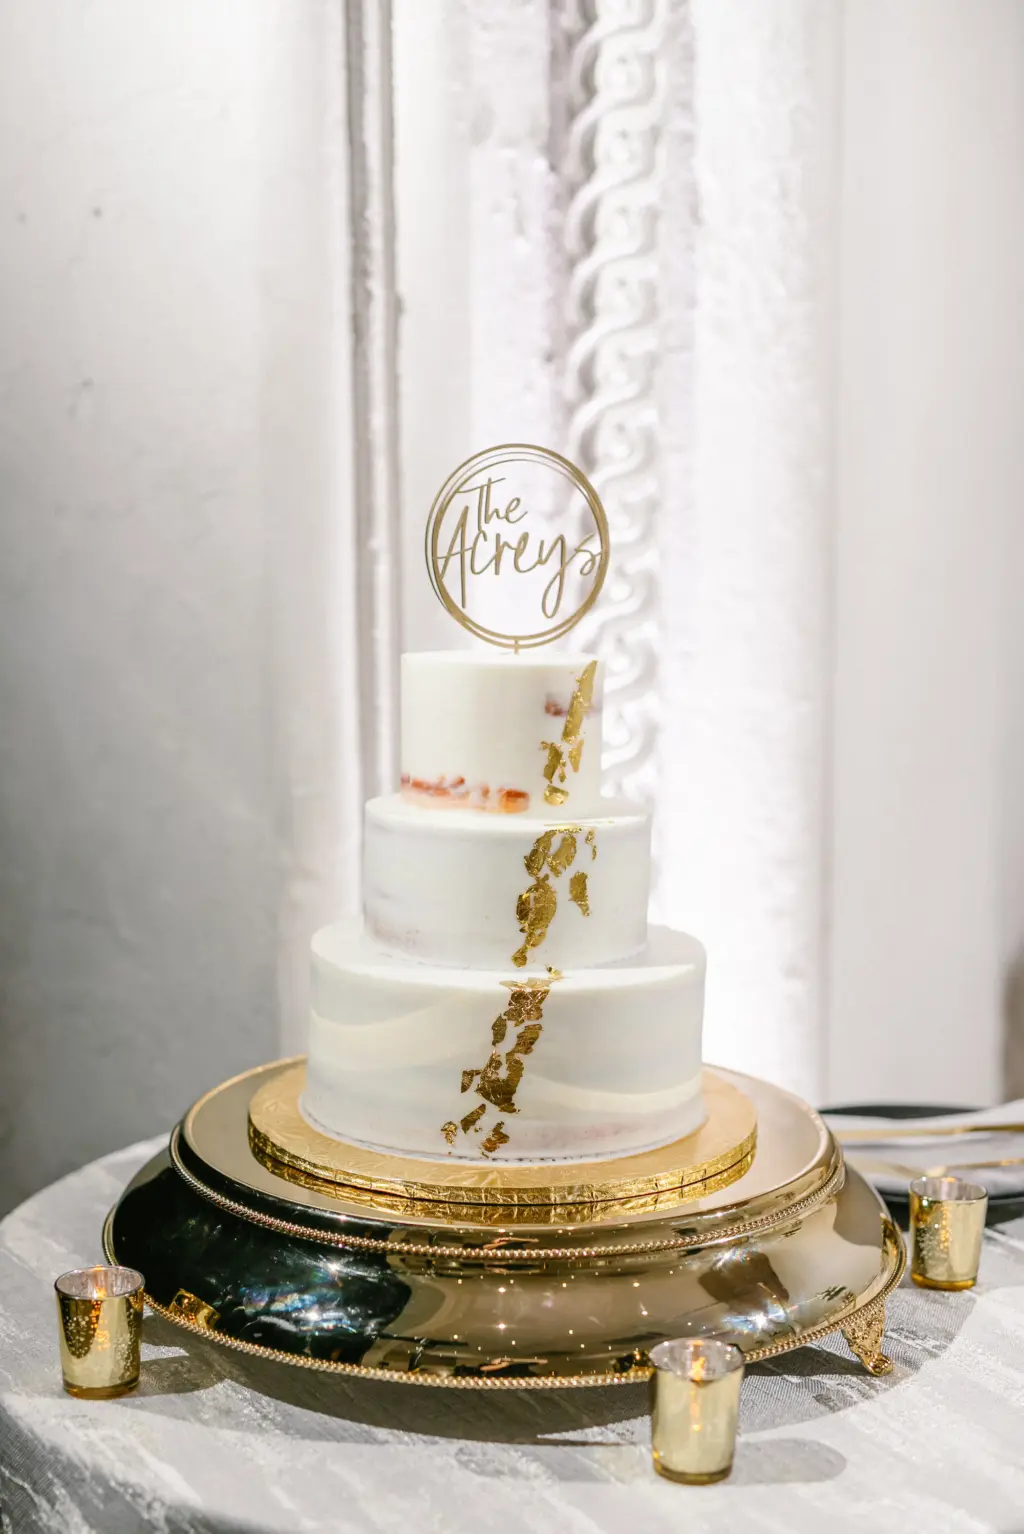 White Three-tiered Round Semi-Naked Wedding Cake with Edible Gold Leaf Foil Accents Inspiration | Custom Laser Cut Wedding Cake Topper Ideas